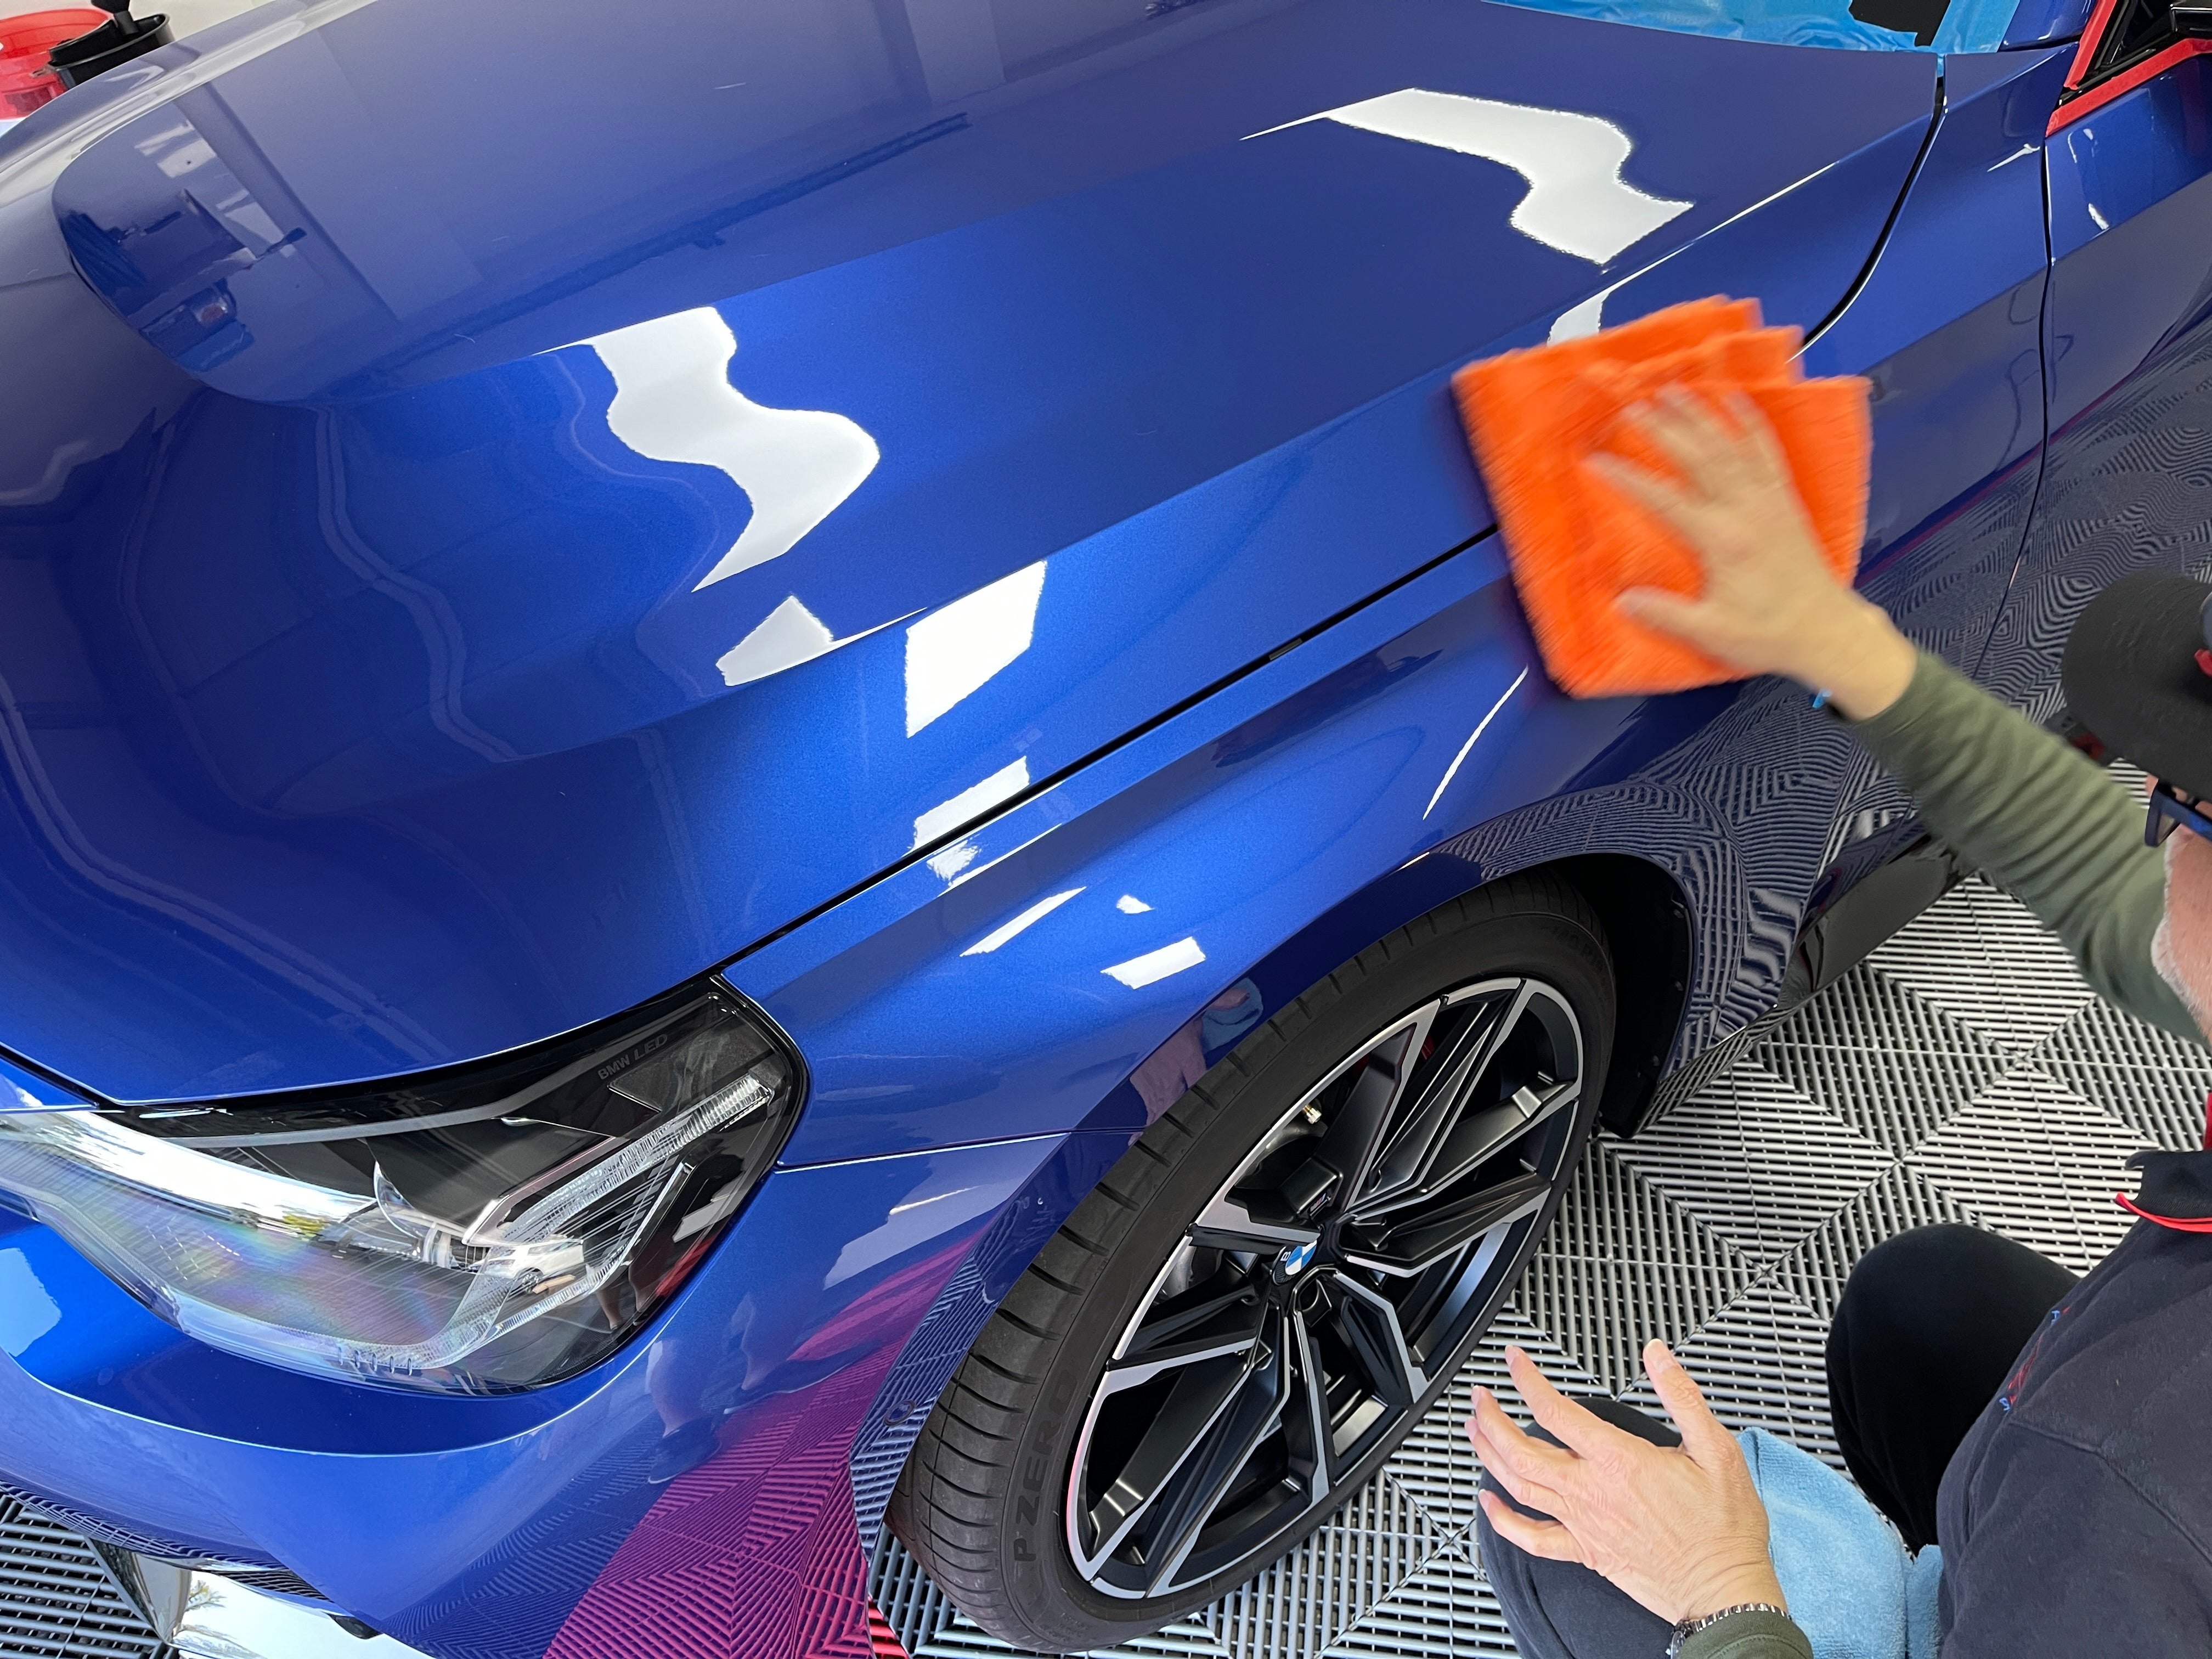 What's the Difference Between Ceramic Sealant Spray and a Ceramic Coating?